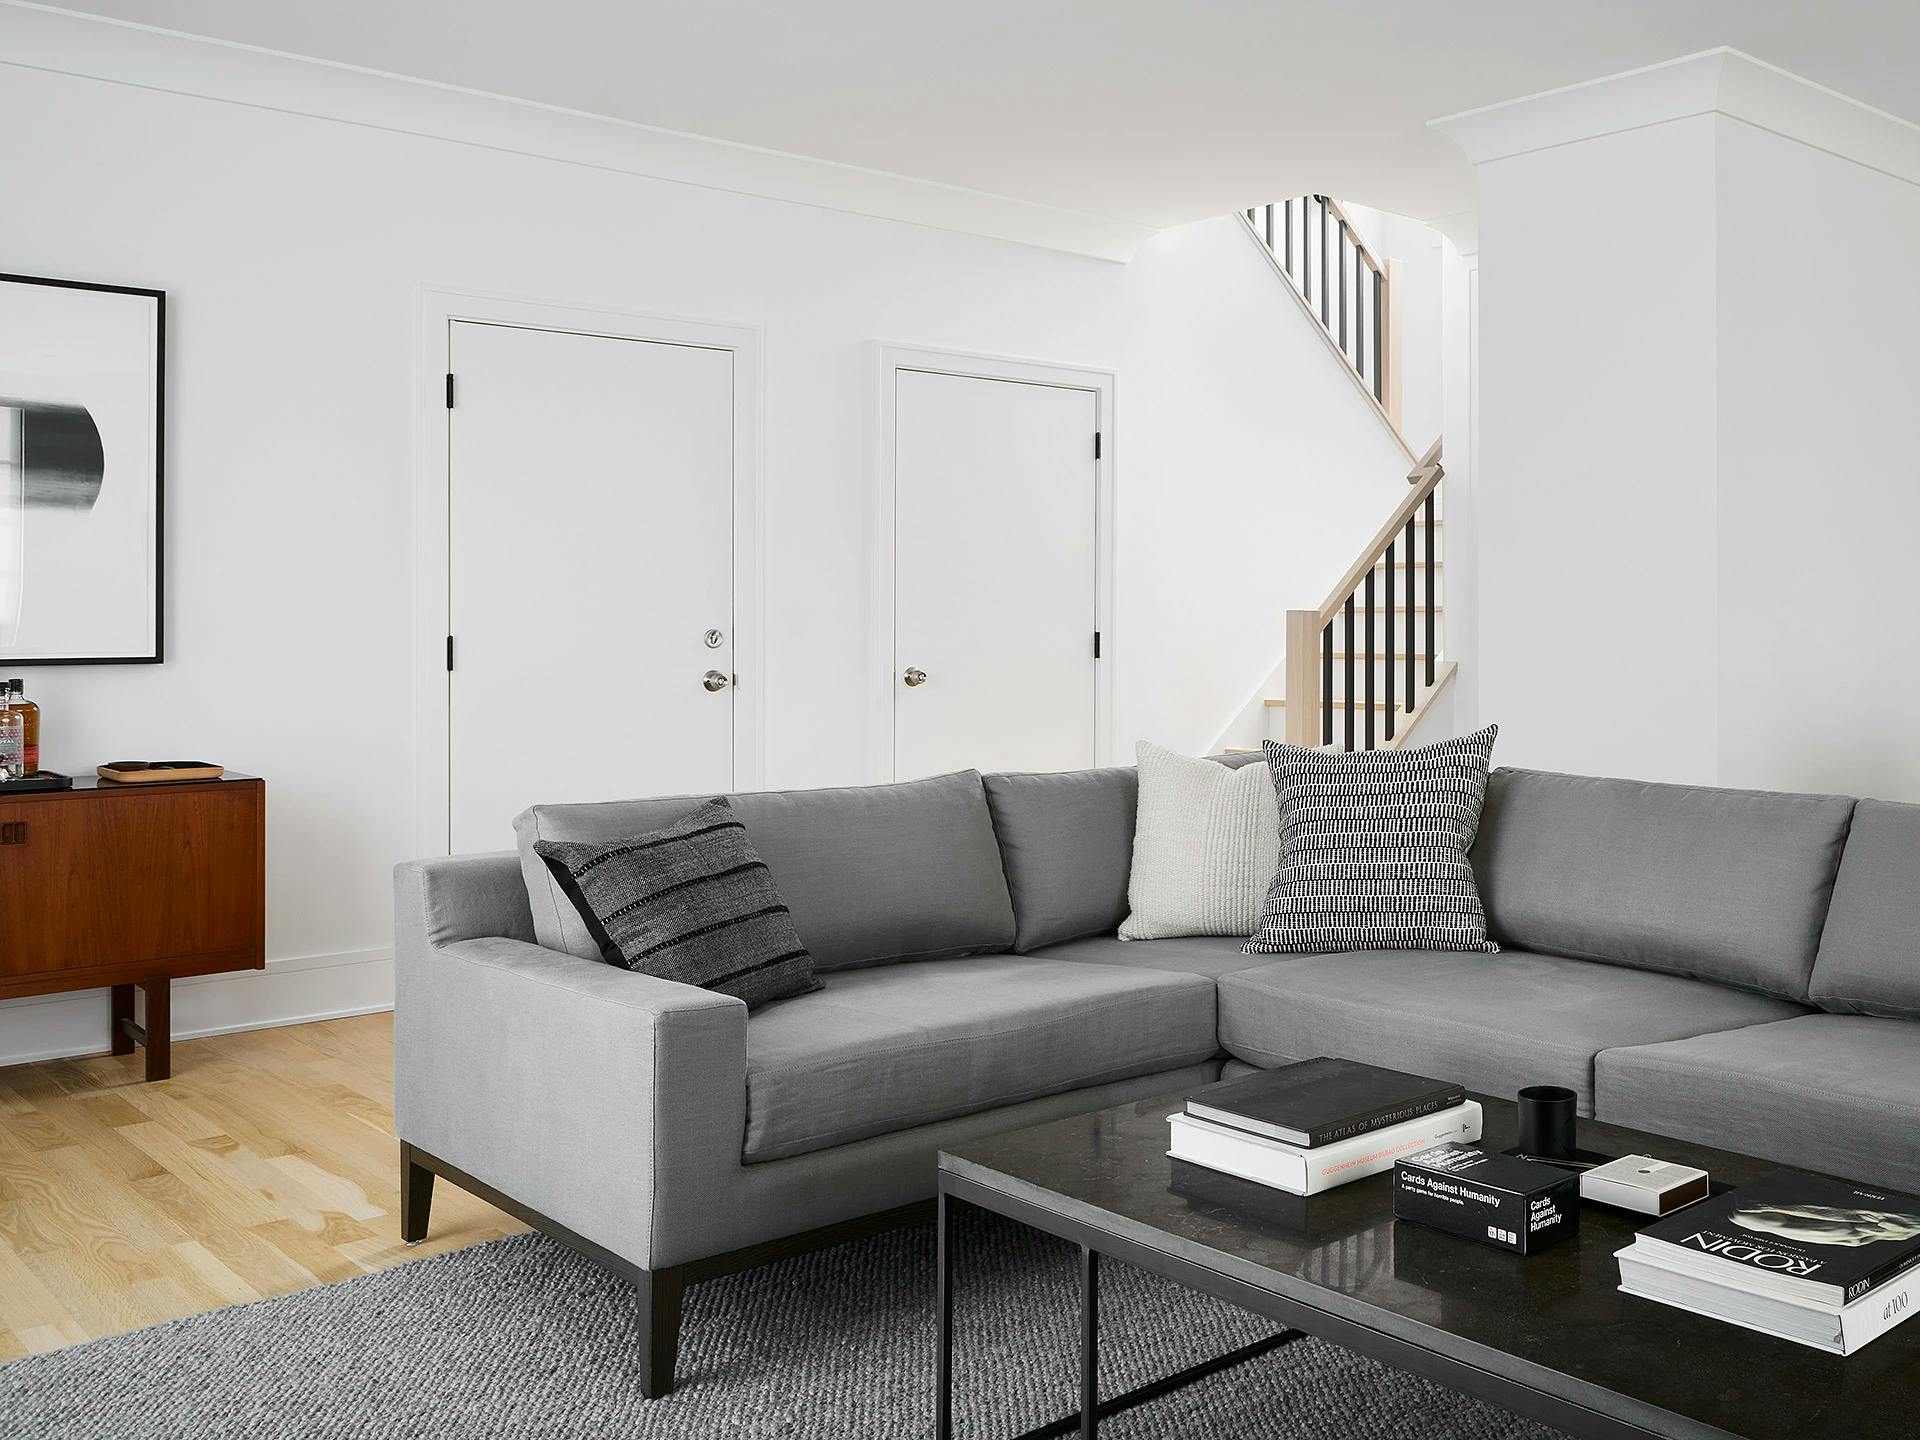 A minimalist living room with stark white walls and a gray sectional sofa in a Chicago apartment.